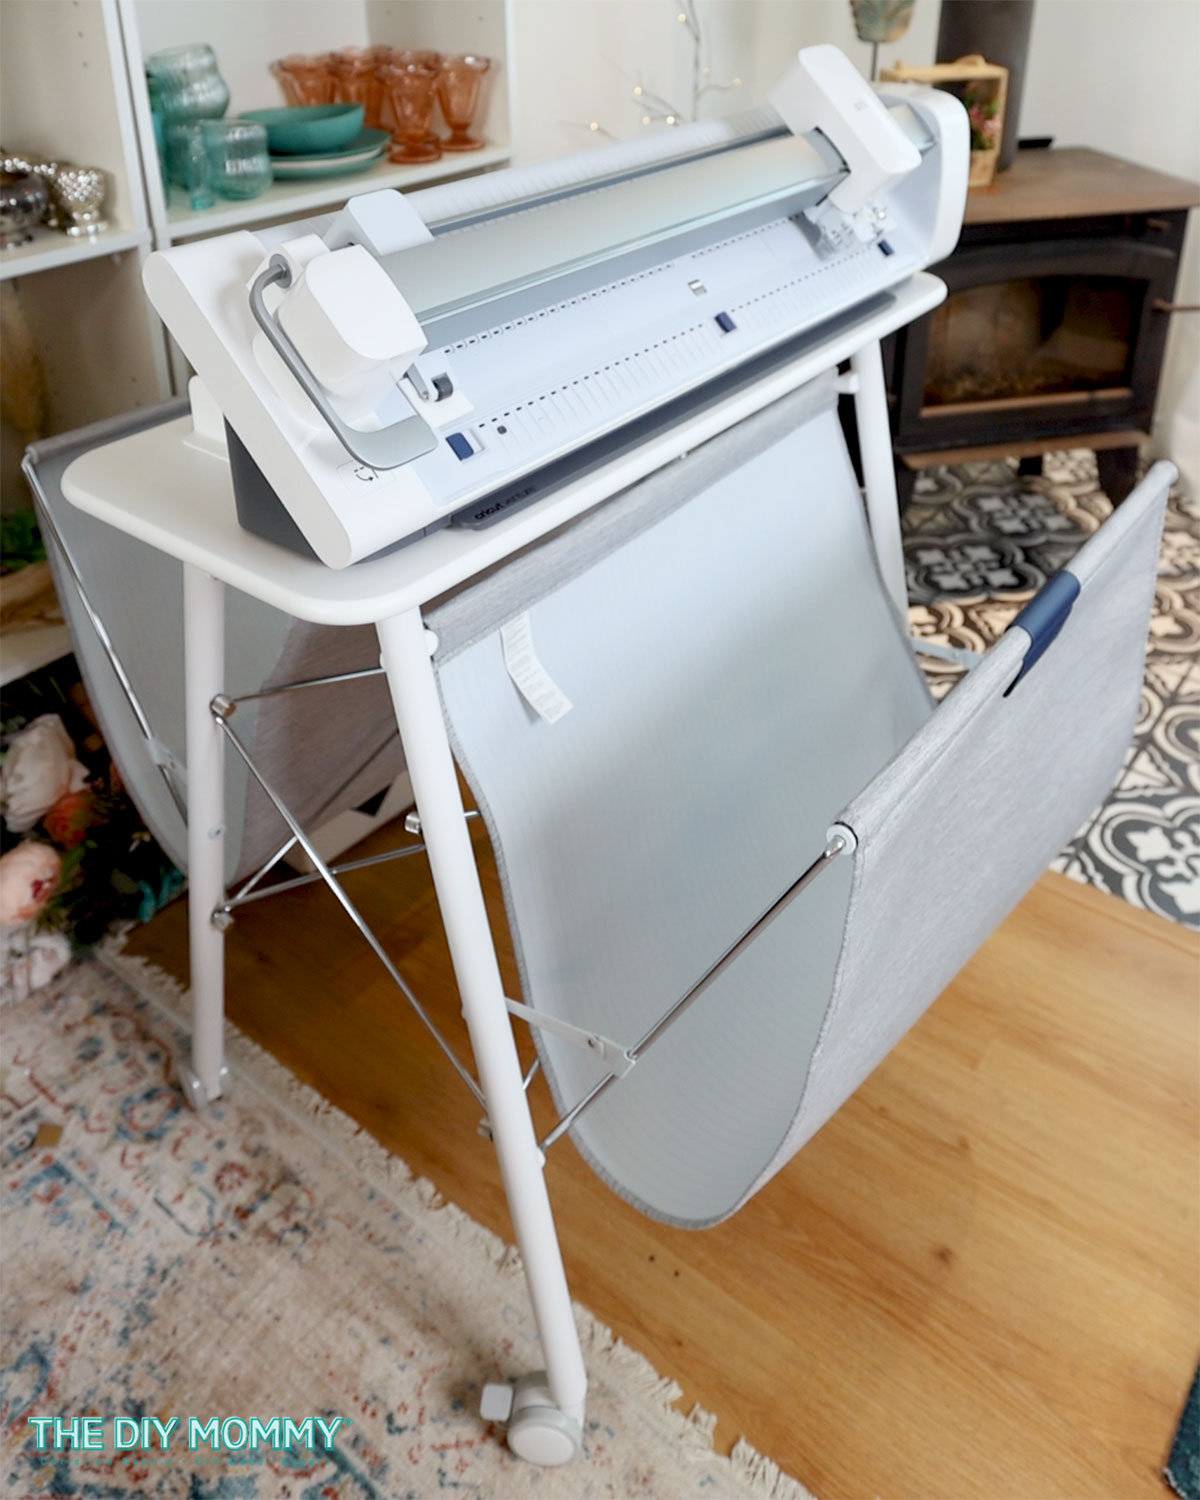 Cricut Maker 3 - What You DON'T Get With The New Cricut Machine